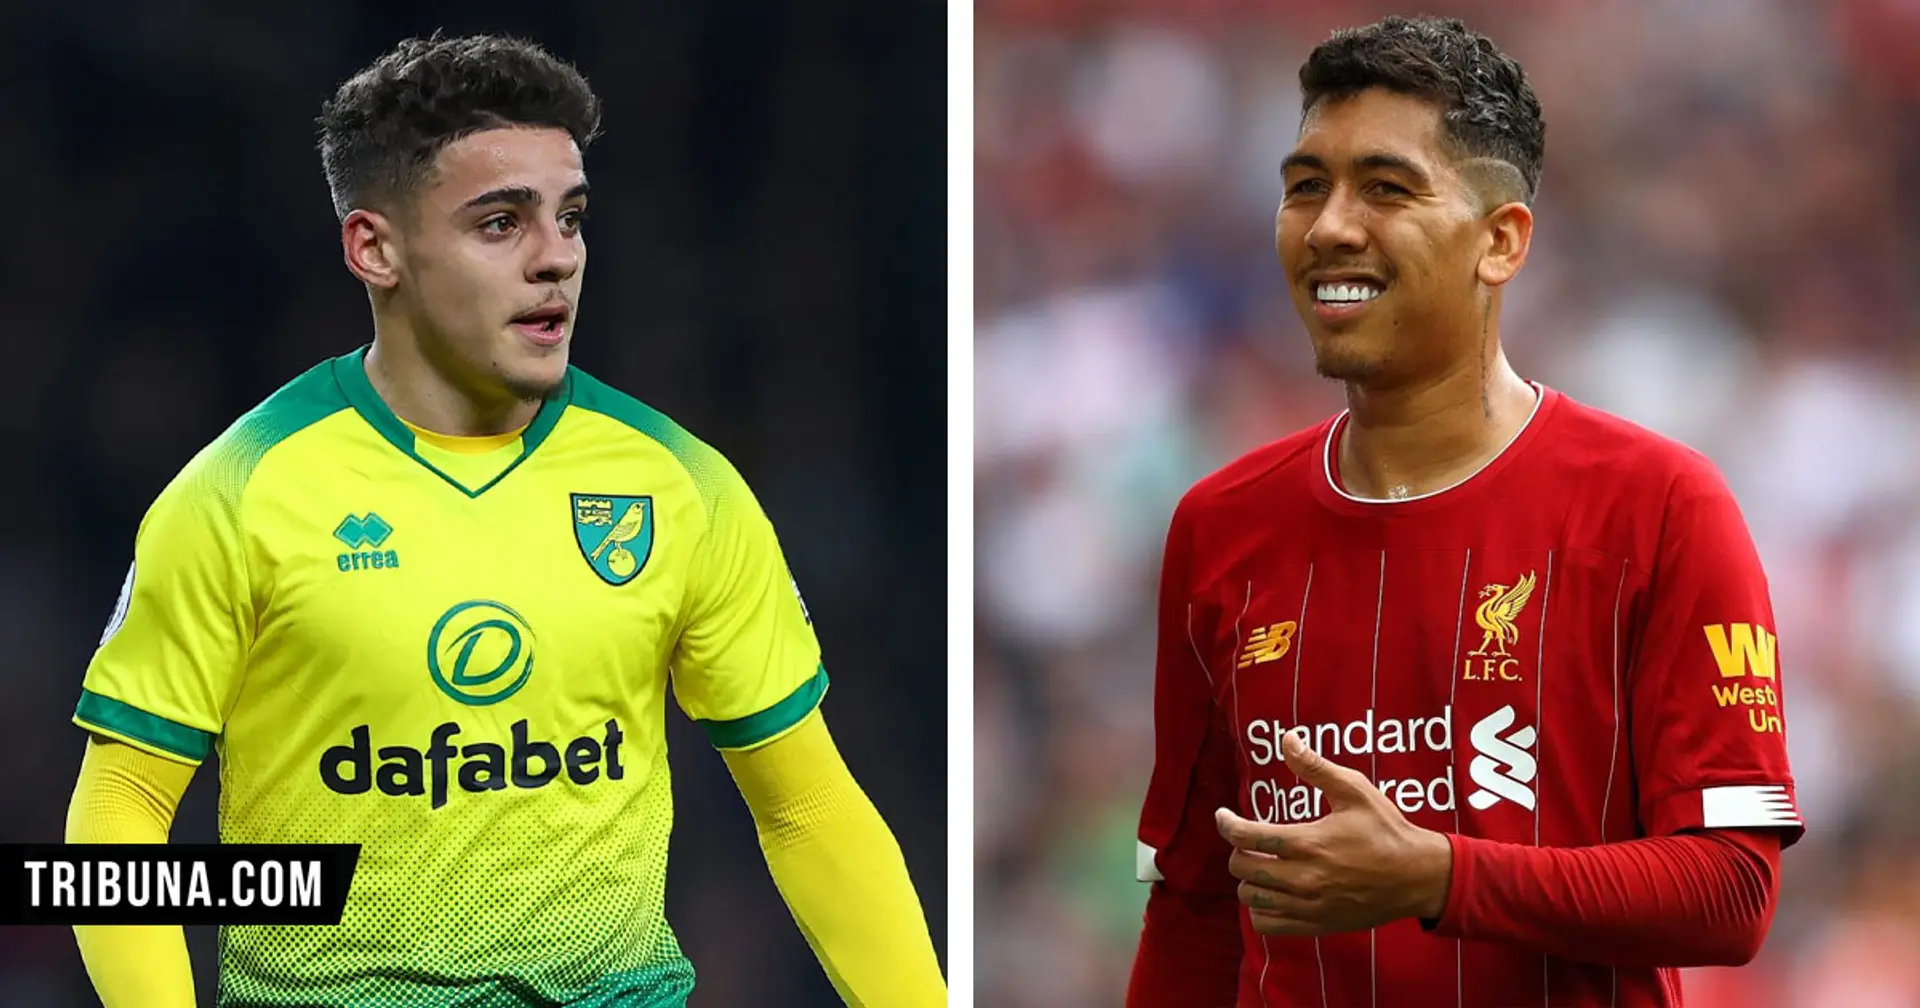 'Wow': Norwich defender Aarons recalls Firmino's 'unbelievable' masterclass against Canaries